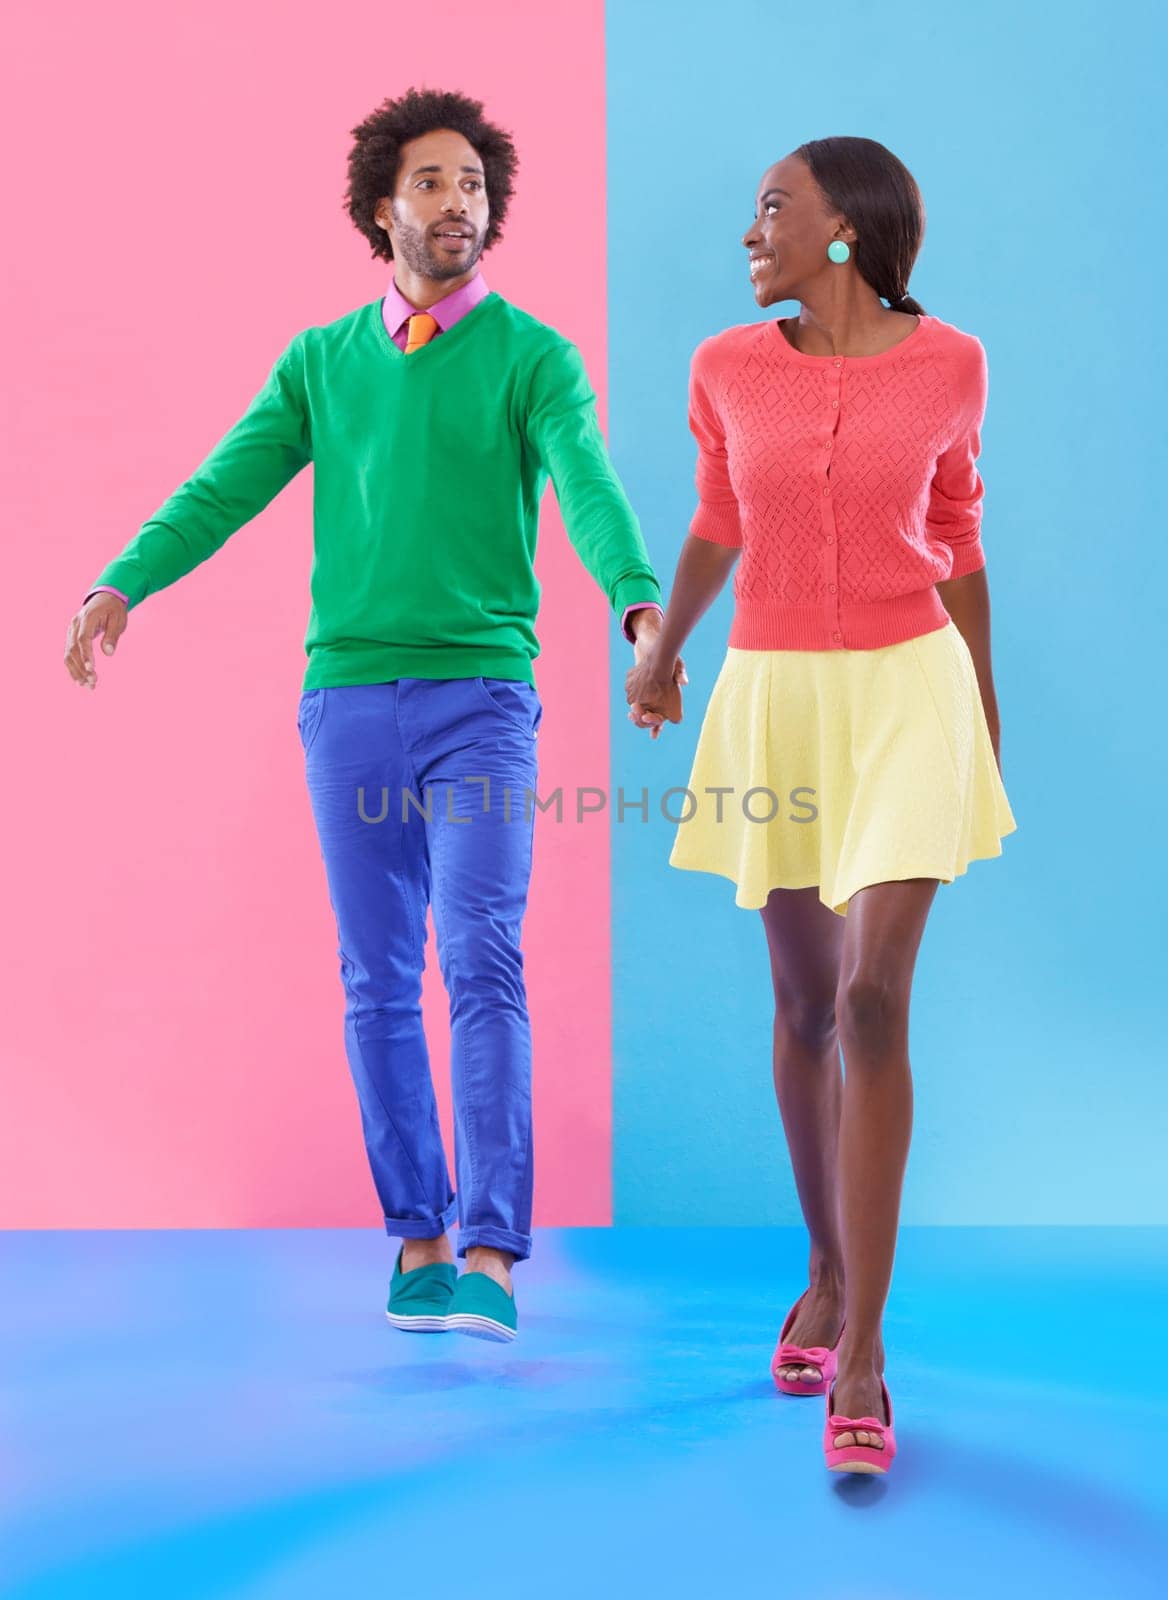 Couple, walk and holding hands with fashion in studio, background and creative aesthetic. Happy, woman and man together with colorful retro style, unique clothes or person with support or trust.